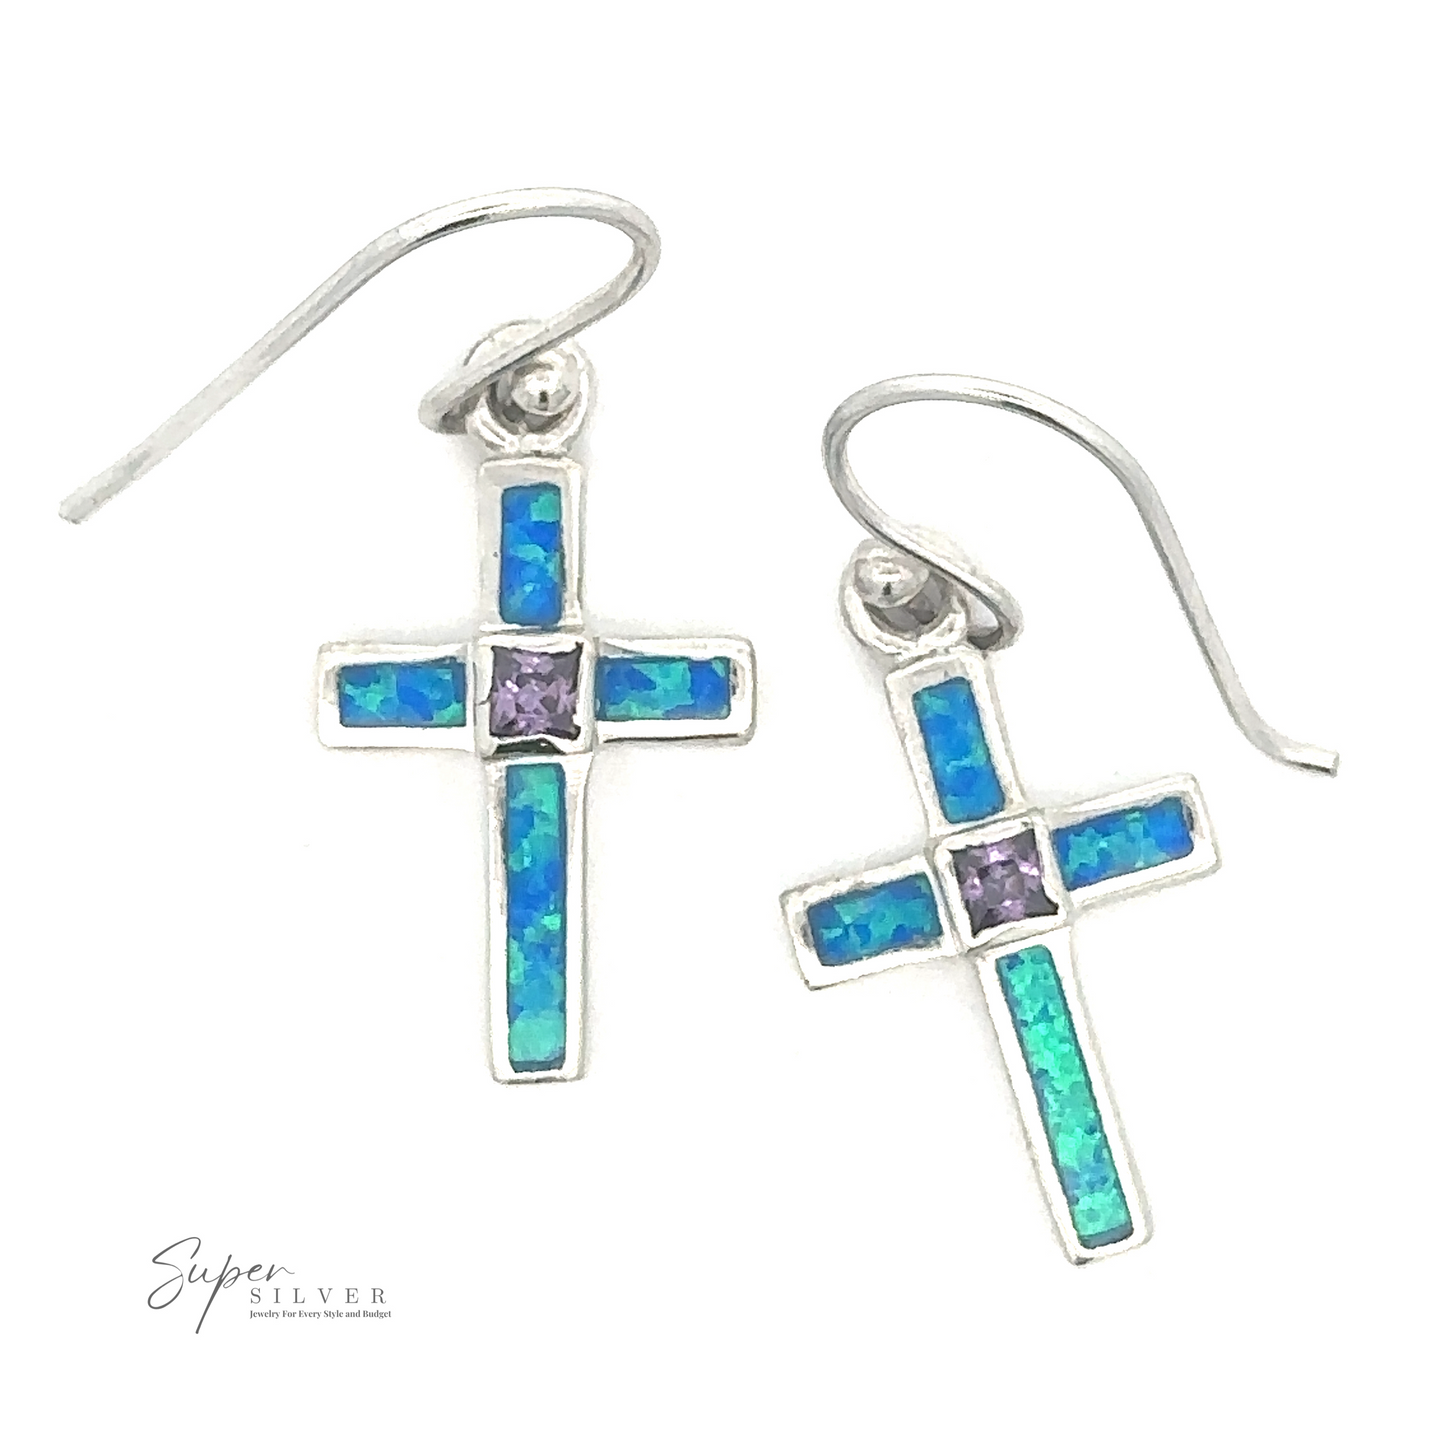 
                  
                    A pair of Blue Opal Cross Earrings With Amethyst Center Stone featuring blue opal and amethyst stones with hook fastenings. The logo "Super Silver" is in the bottom left corner.
                  
                